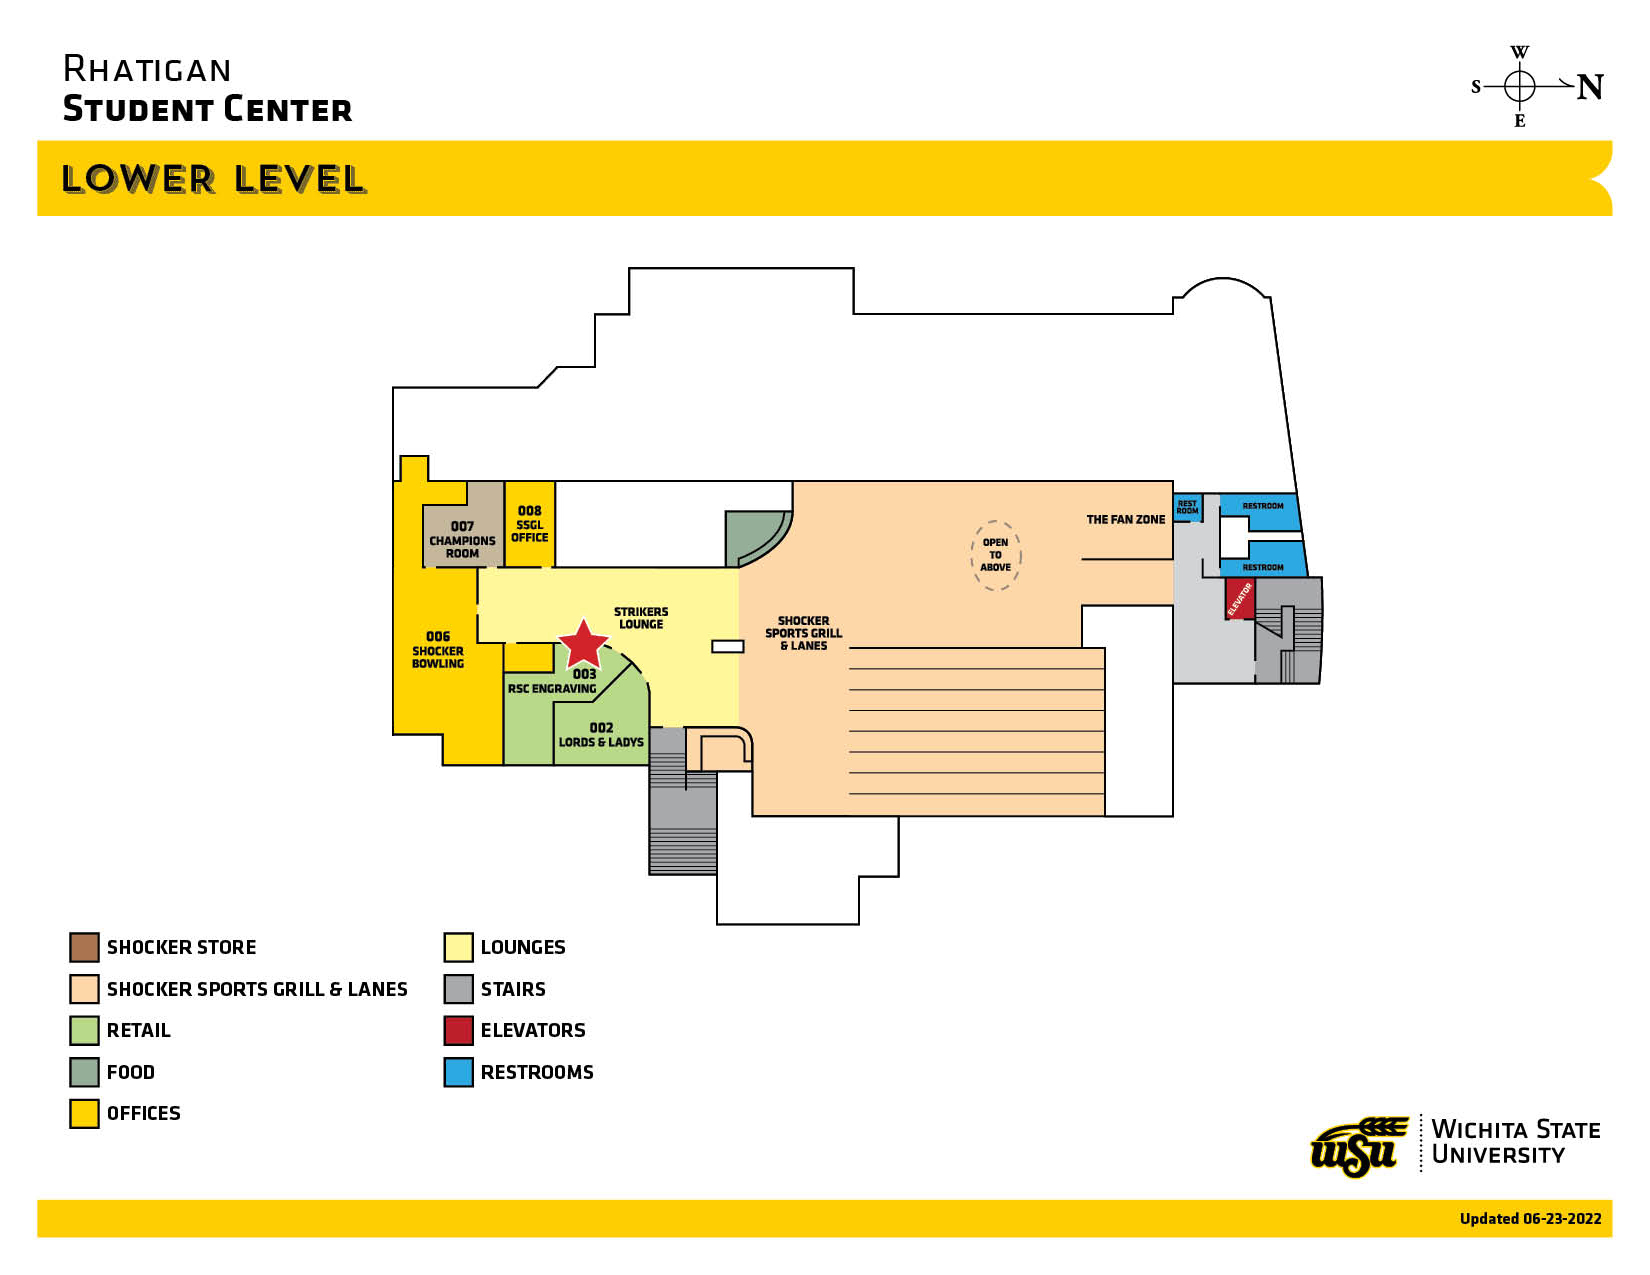 Lower level of the Rhatigan Student Center showing the Shocker Sports Grill and Lanes, RSC Engraving, Lord's and Lady's Salon, Shocker Bowling, and the textbook level of the Shocker Store. This is a space for gathering, eating, and entertainment.